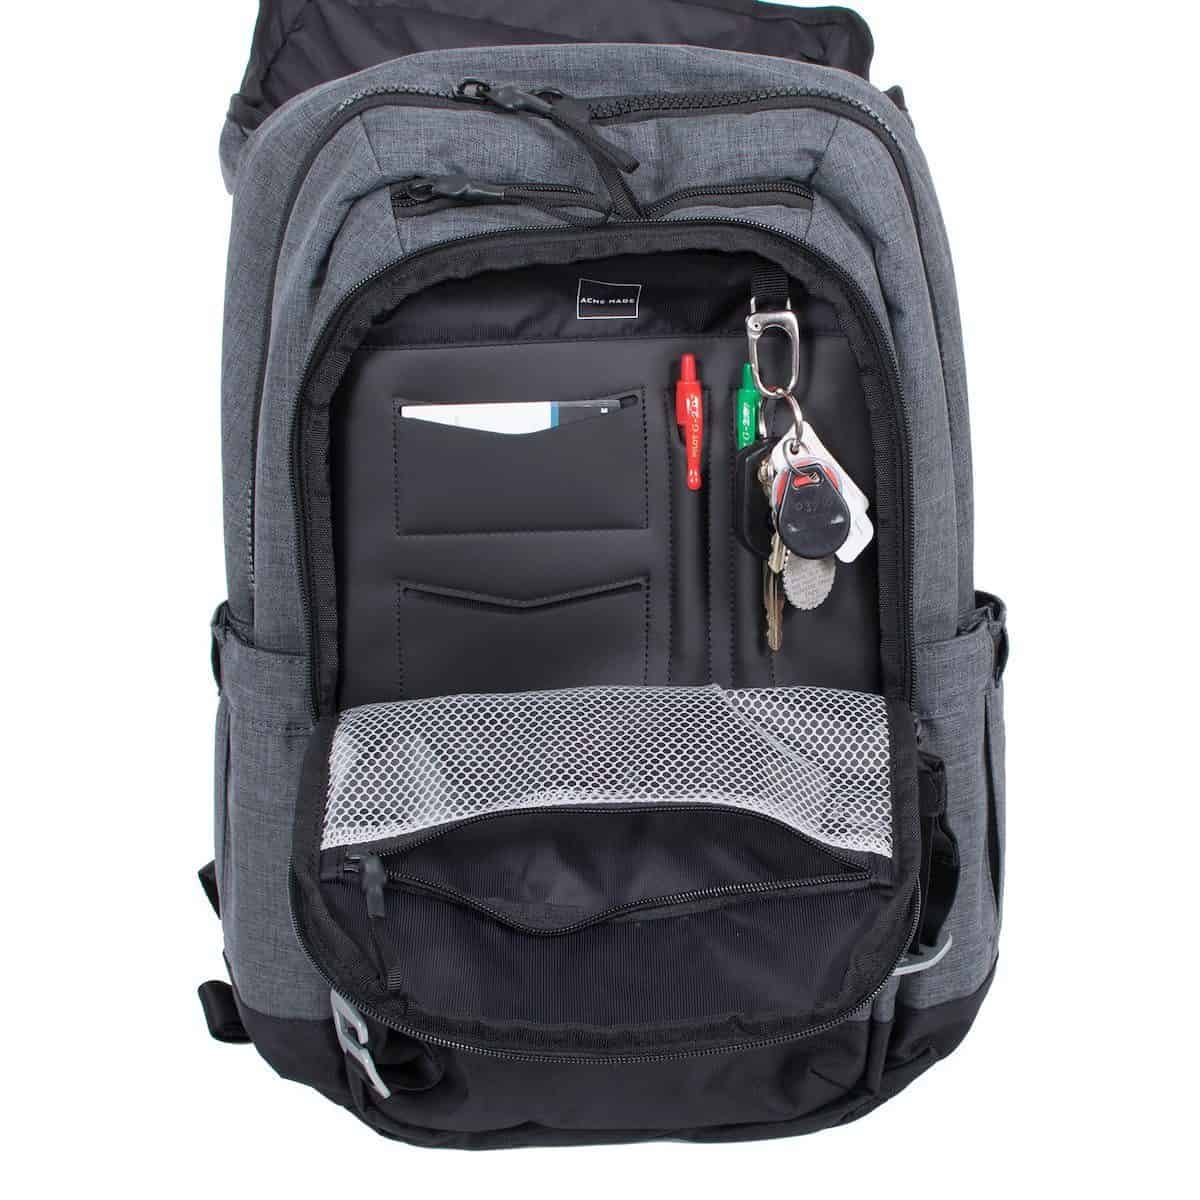 dailymom parent portal acme backpack 1 daily mom parent portal gifts for men